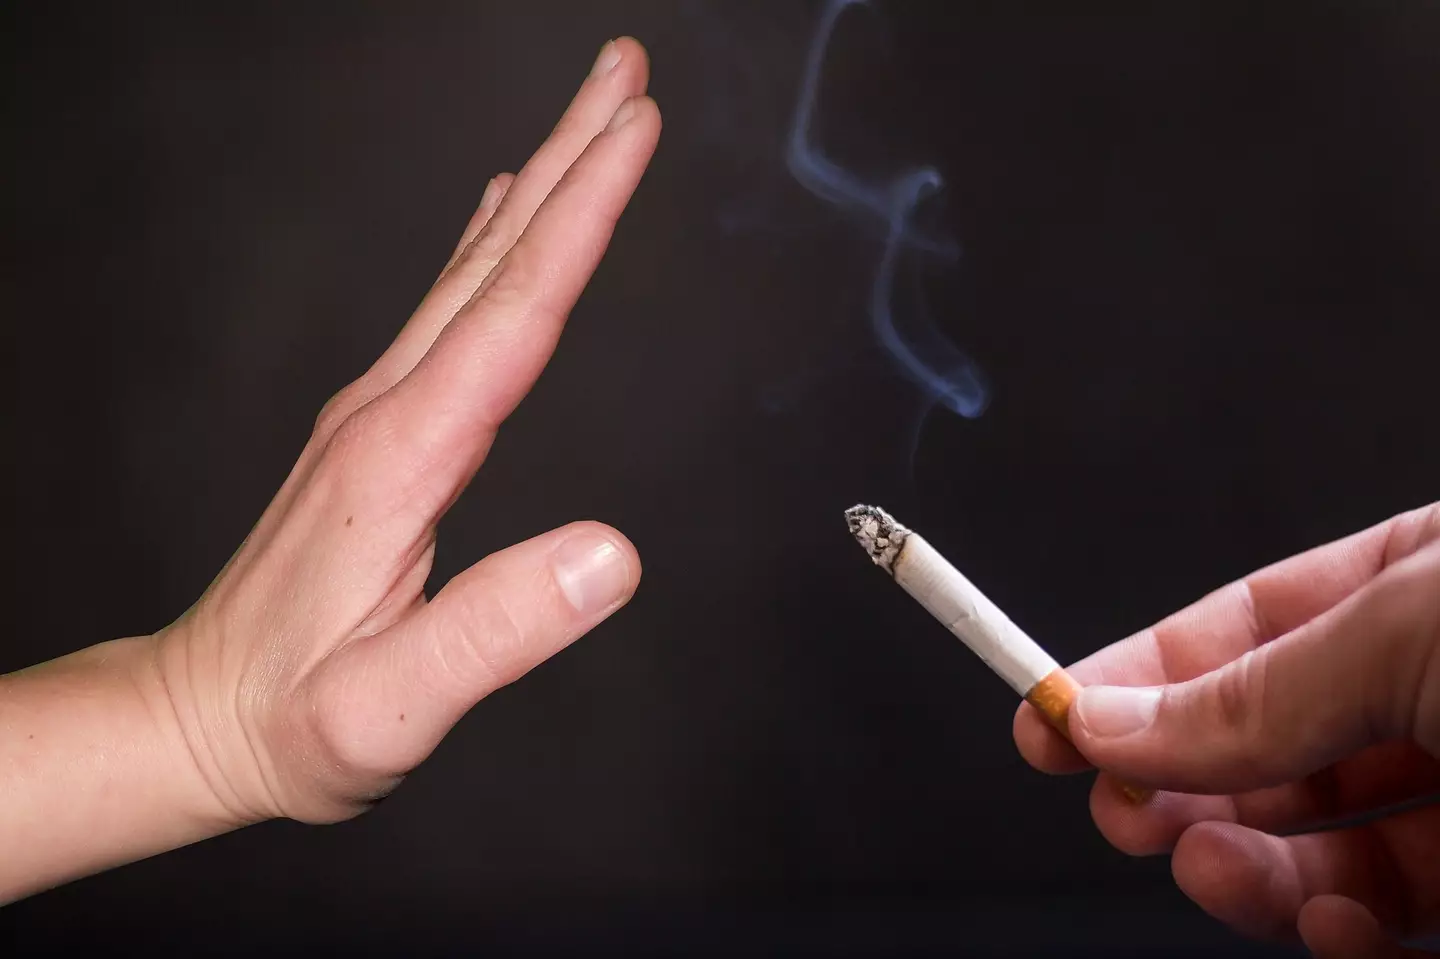 Evidence has shown smokers are more likely to quit with incentives.